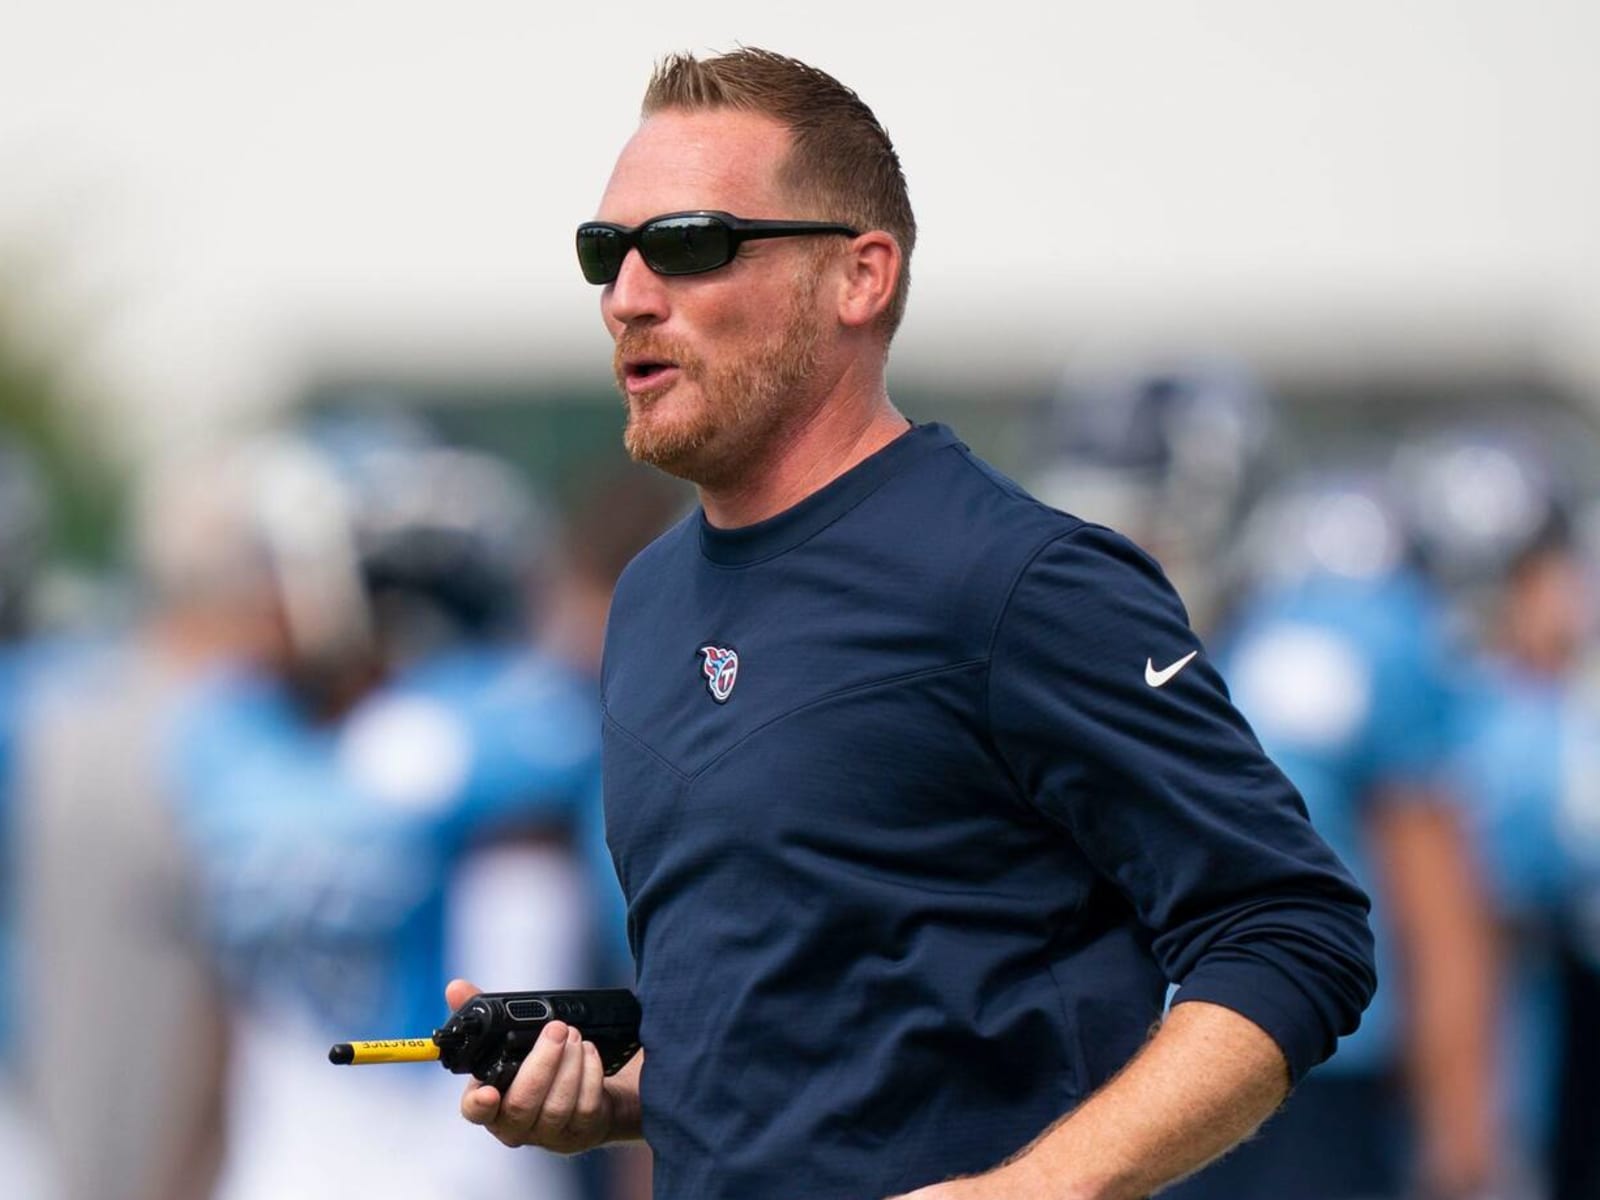 Todd Downing to remain Titans OC after DUI arrest